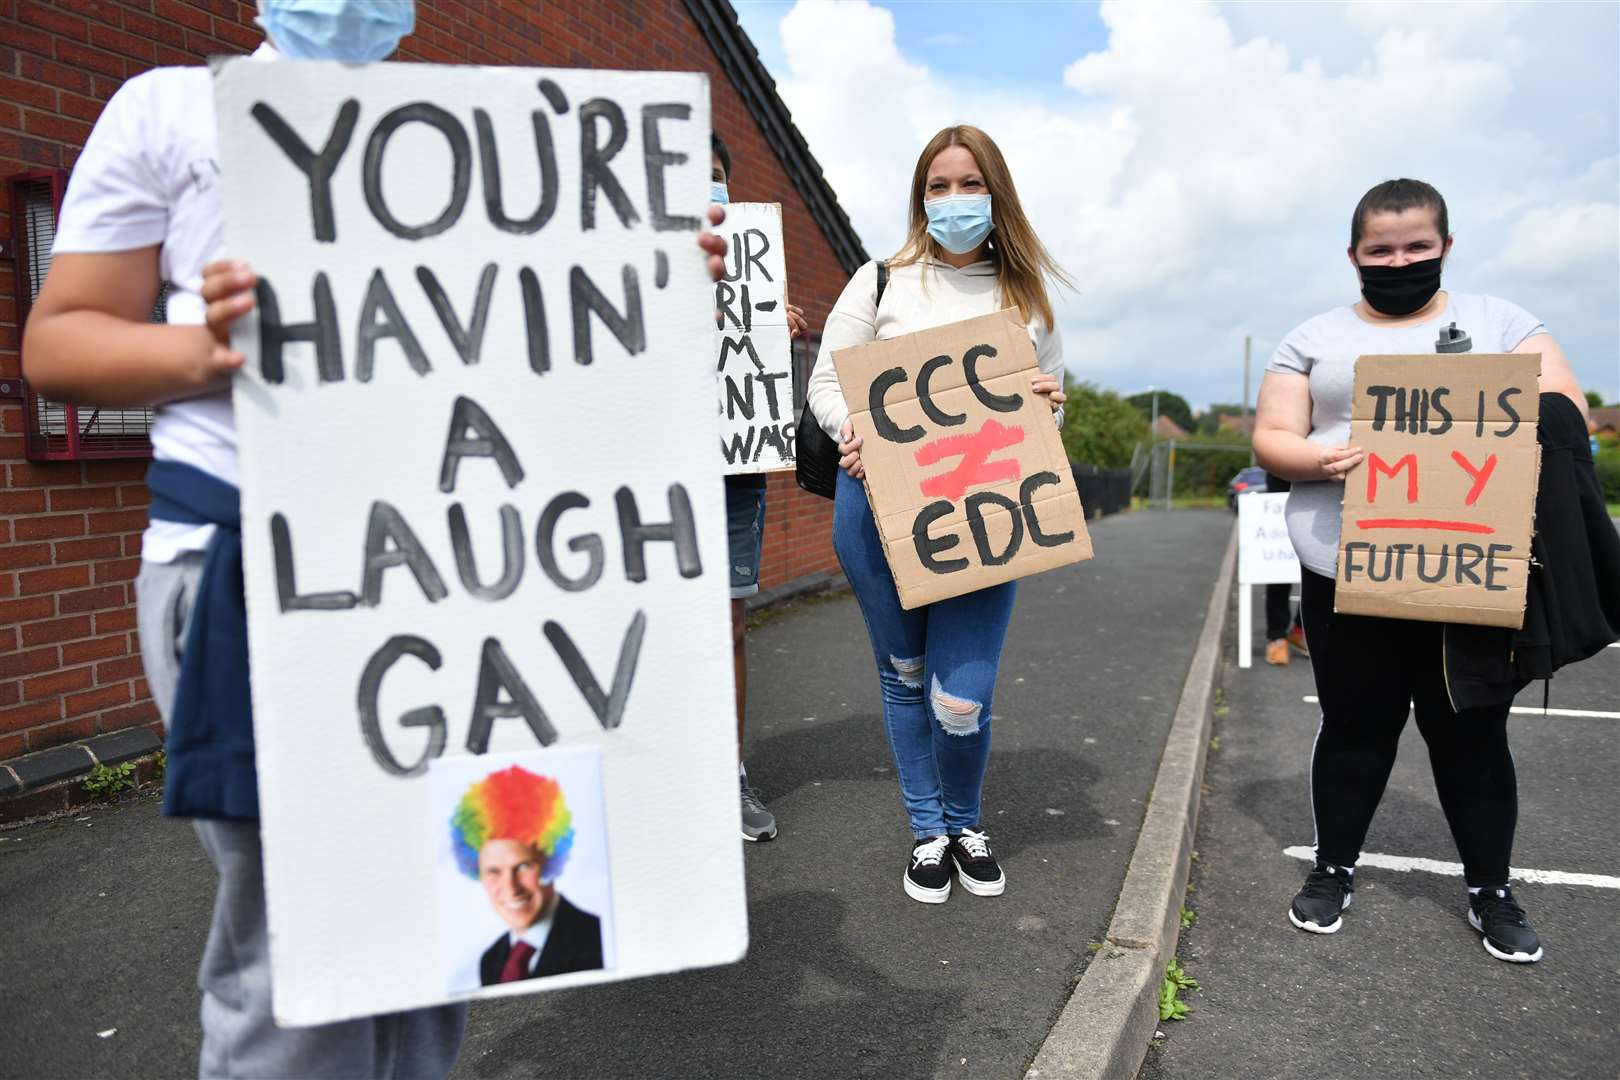 Students from Codsall Community High School gather prior to marching to the constituency office of Gavin Williamson as part of a protest over A-level results (Jacob King/PA)